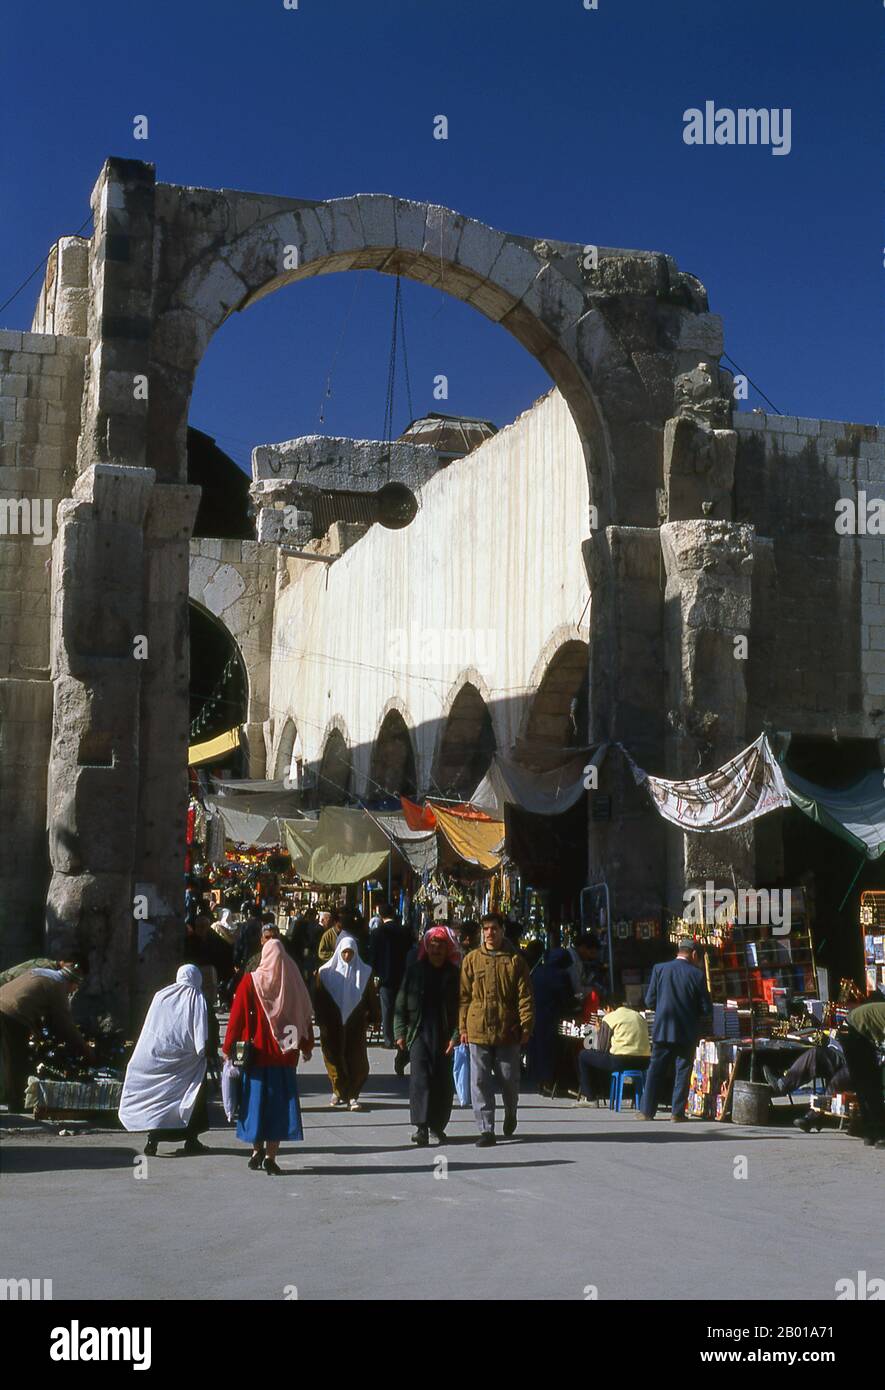 Syria: The ruins of the western gate of the Temple of Jupiter leading to the Souq al-Hamidiyah, Damascus.  The Temple of Jupiter in Damascus was built by the Romans, beginning during the rule of Augustus (23 September 63 BCE – 19 August CE 14) and completed during the rule of Constantius II (7 August 317 – 3 November 361). Stock Photo